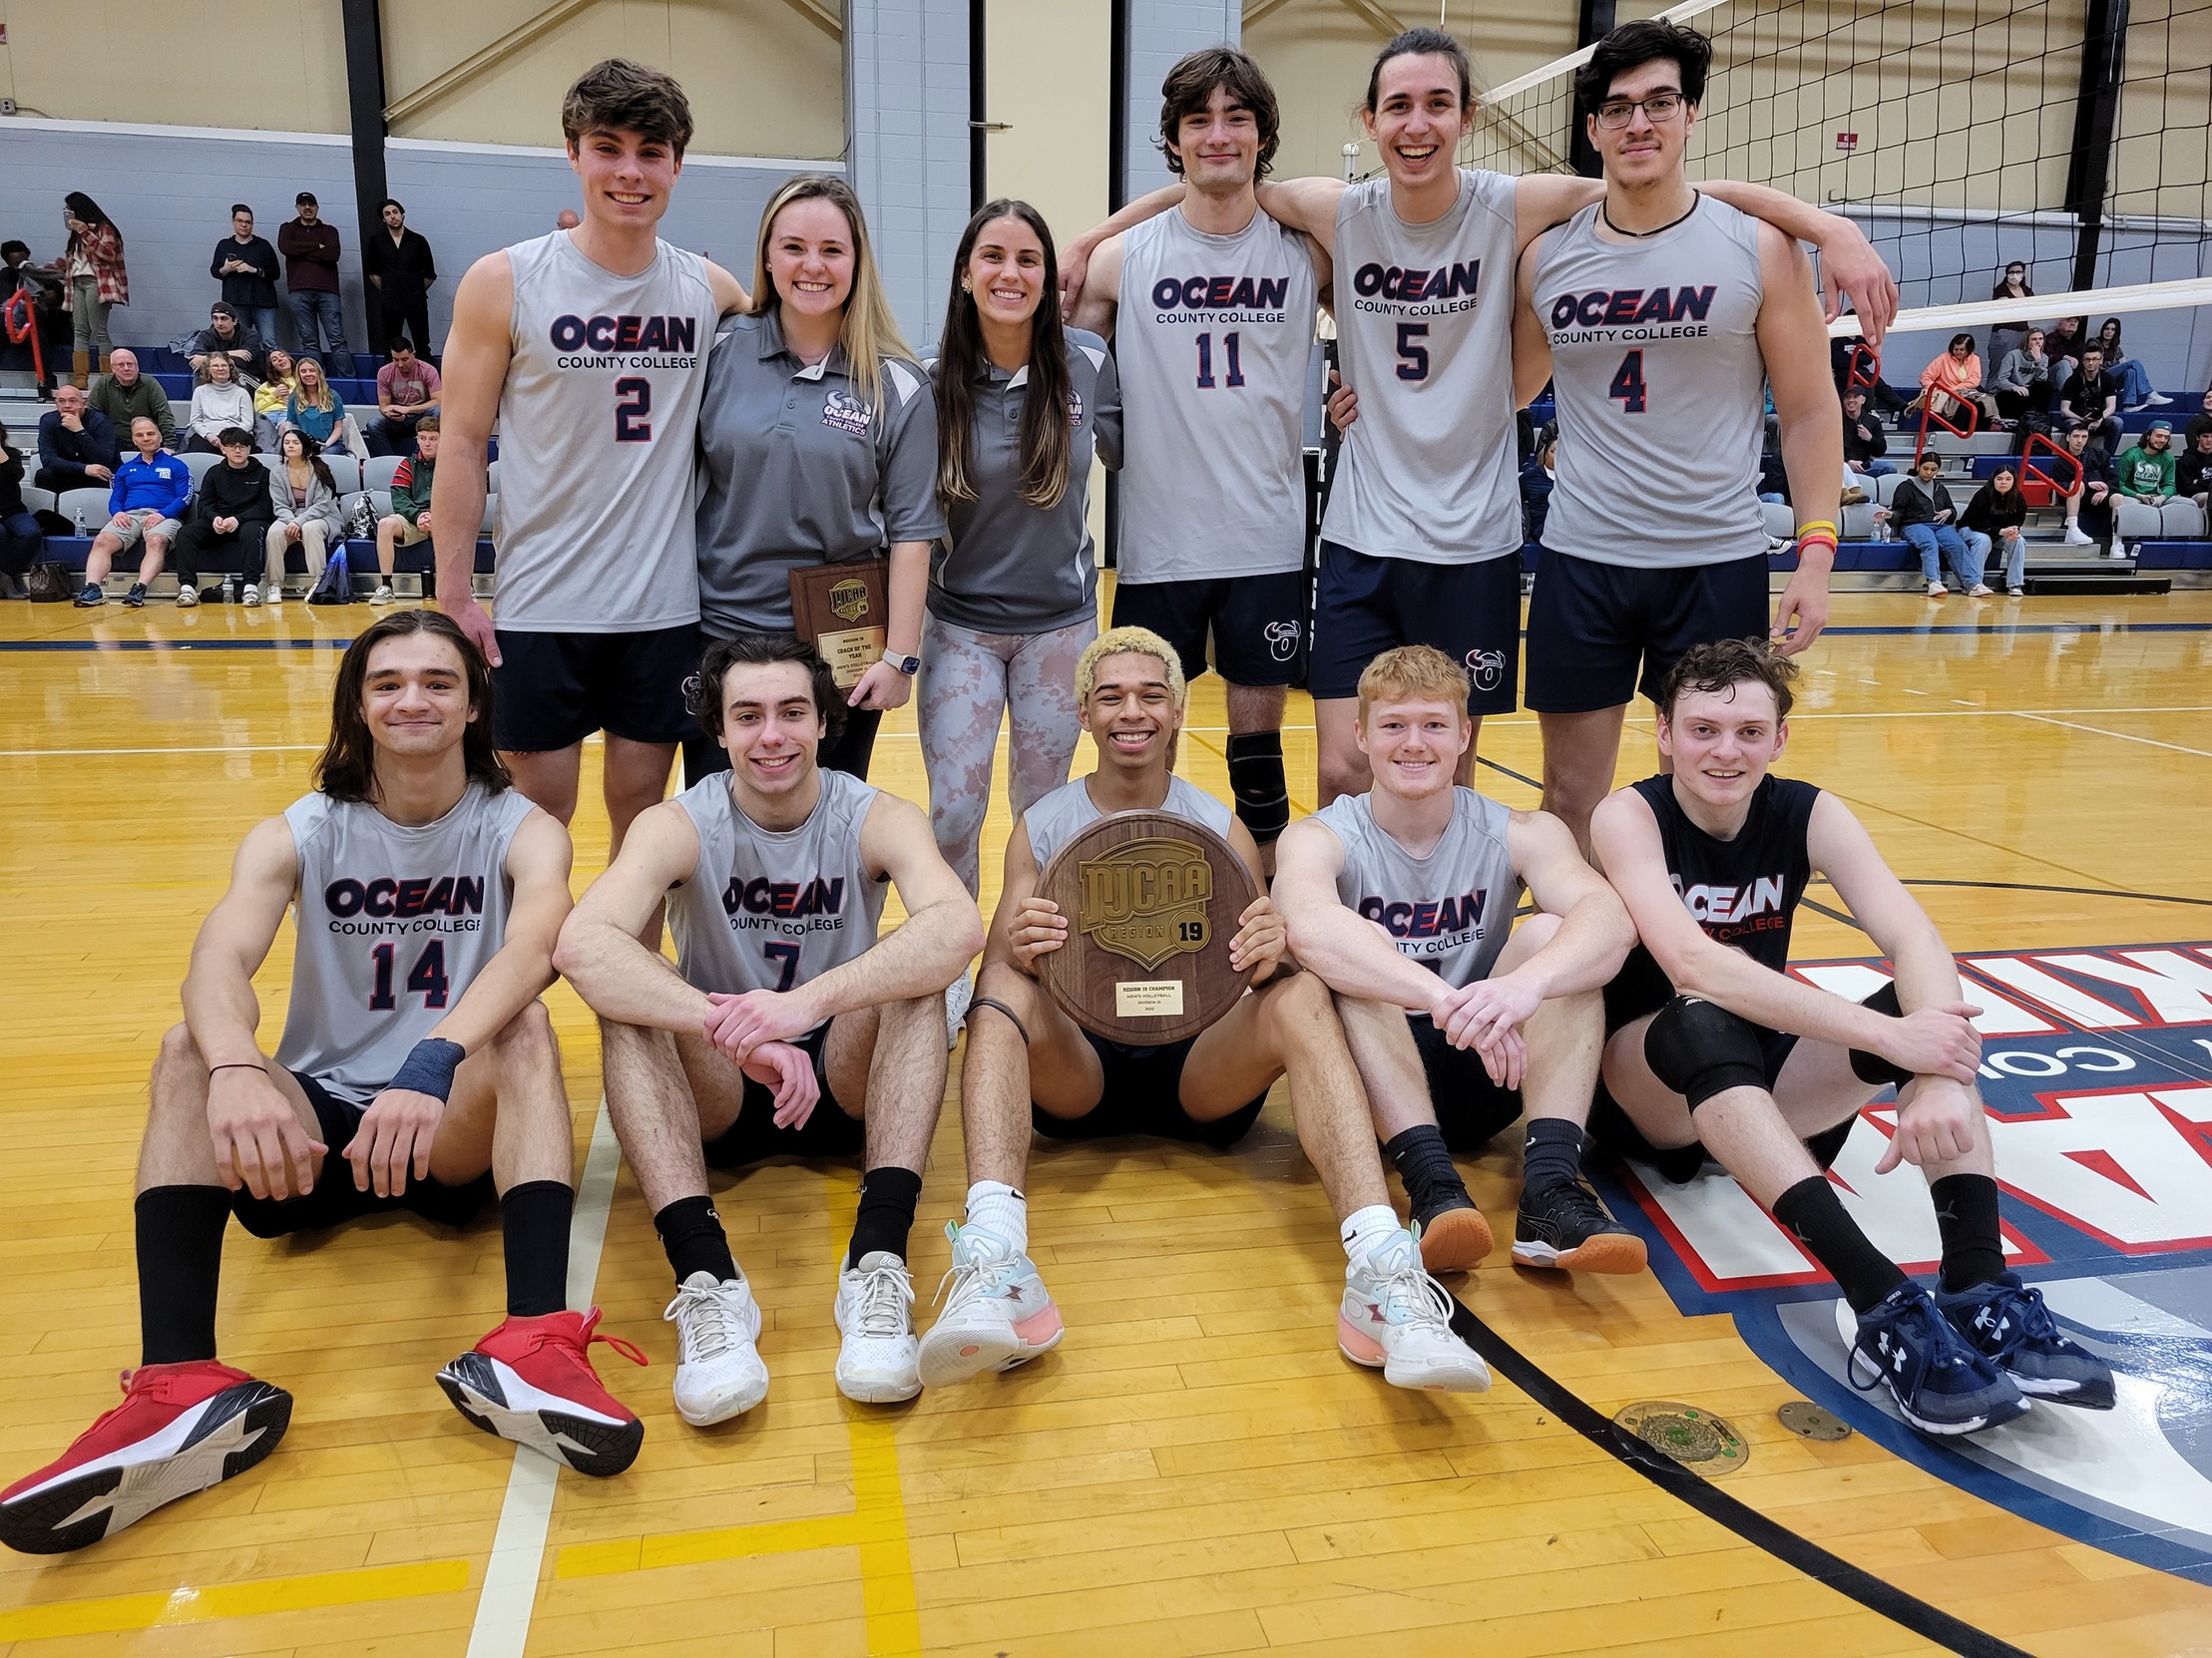 OCC MEN’S VOLLEYBALL CAPTURES GARDEN STATE ATHLETIC CONFERENCE, REGION 19 CHAMPIONSHIPS IN INAUGURAL SEASON